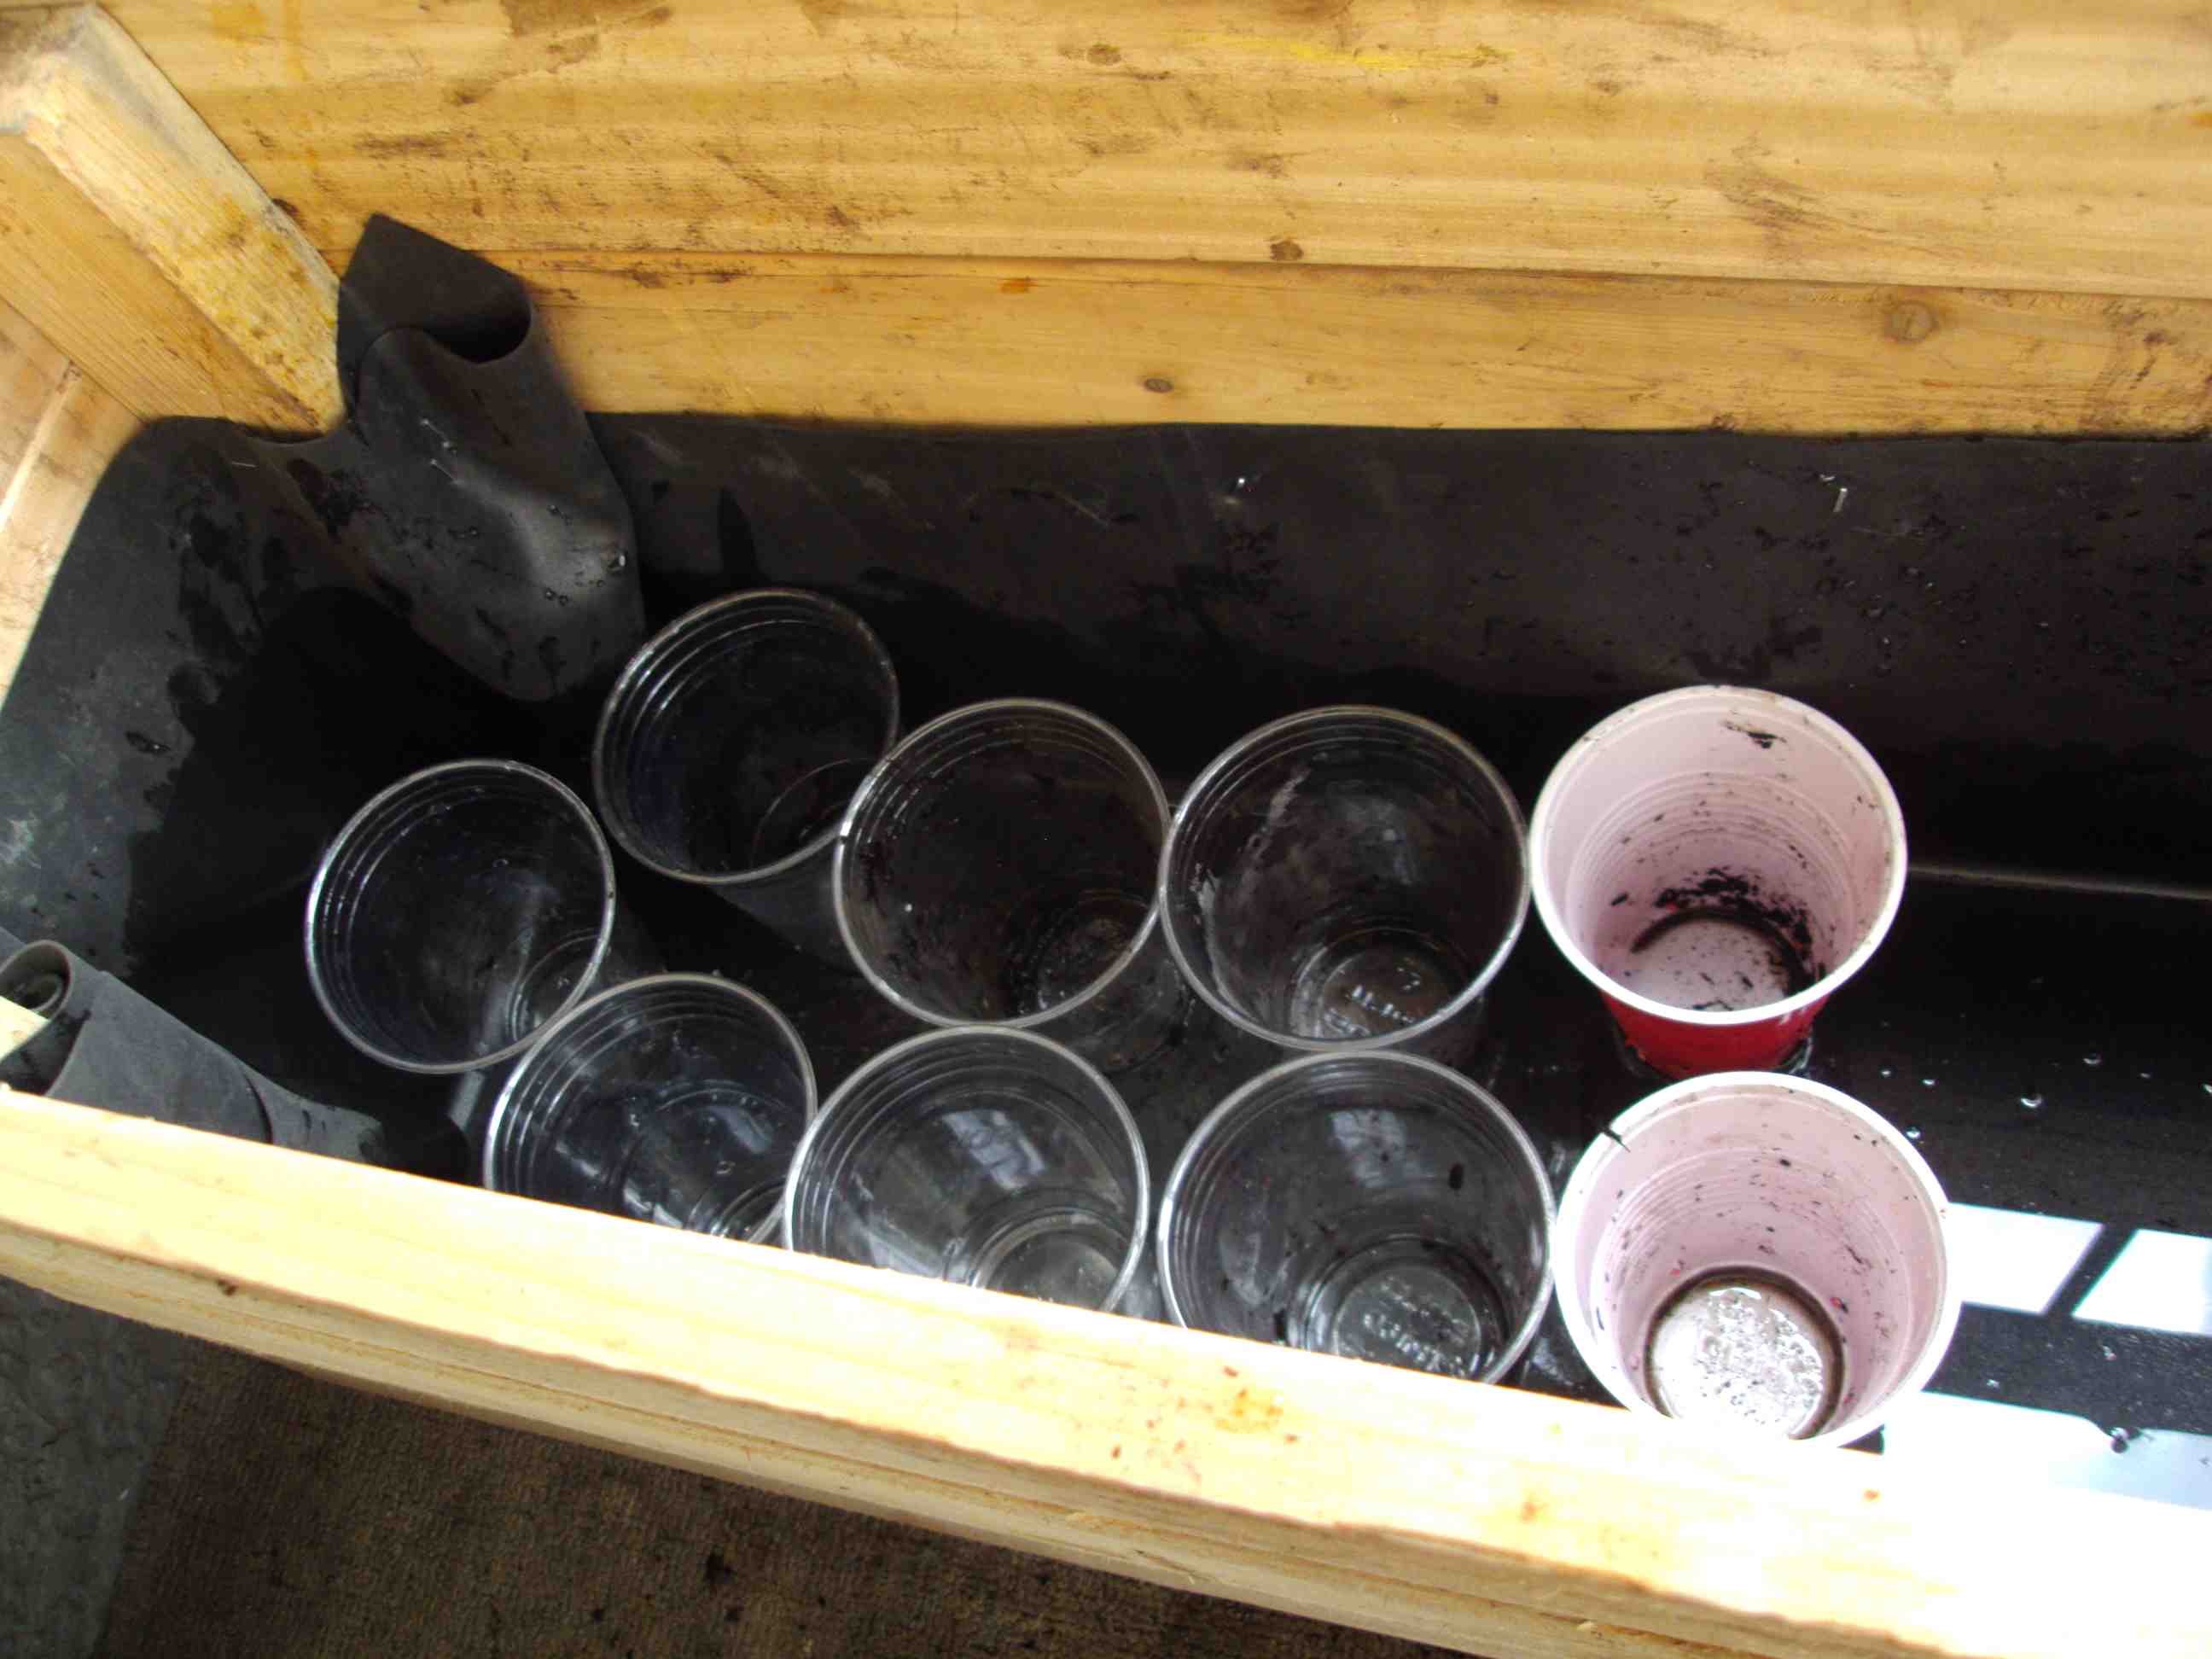 Here we have the cups in the basin. On top goes the mesh and (not photo'd) landscape cloth.